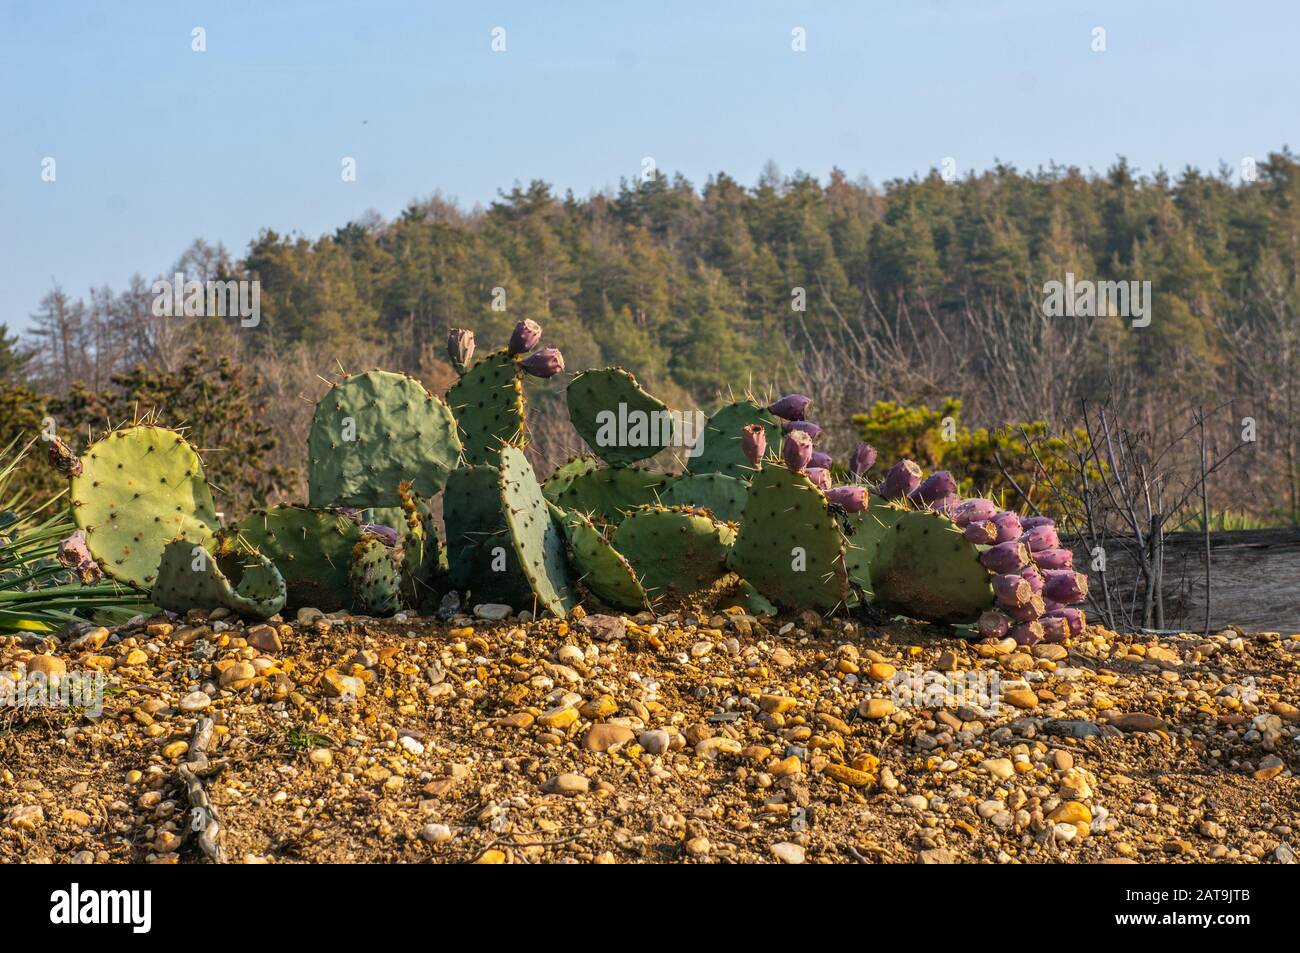 Horizon of vibrant green prickly pear, Opuntia cactus in a row with pink fruits growing on them. Saturated colours and warm light on the beige gravel Stock Photo